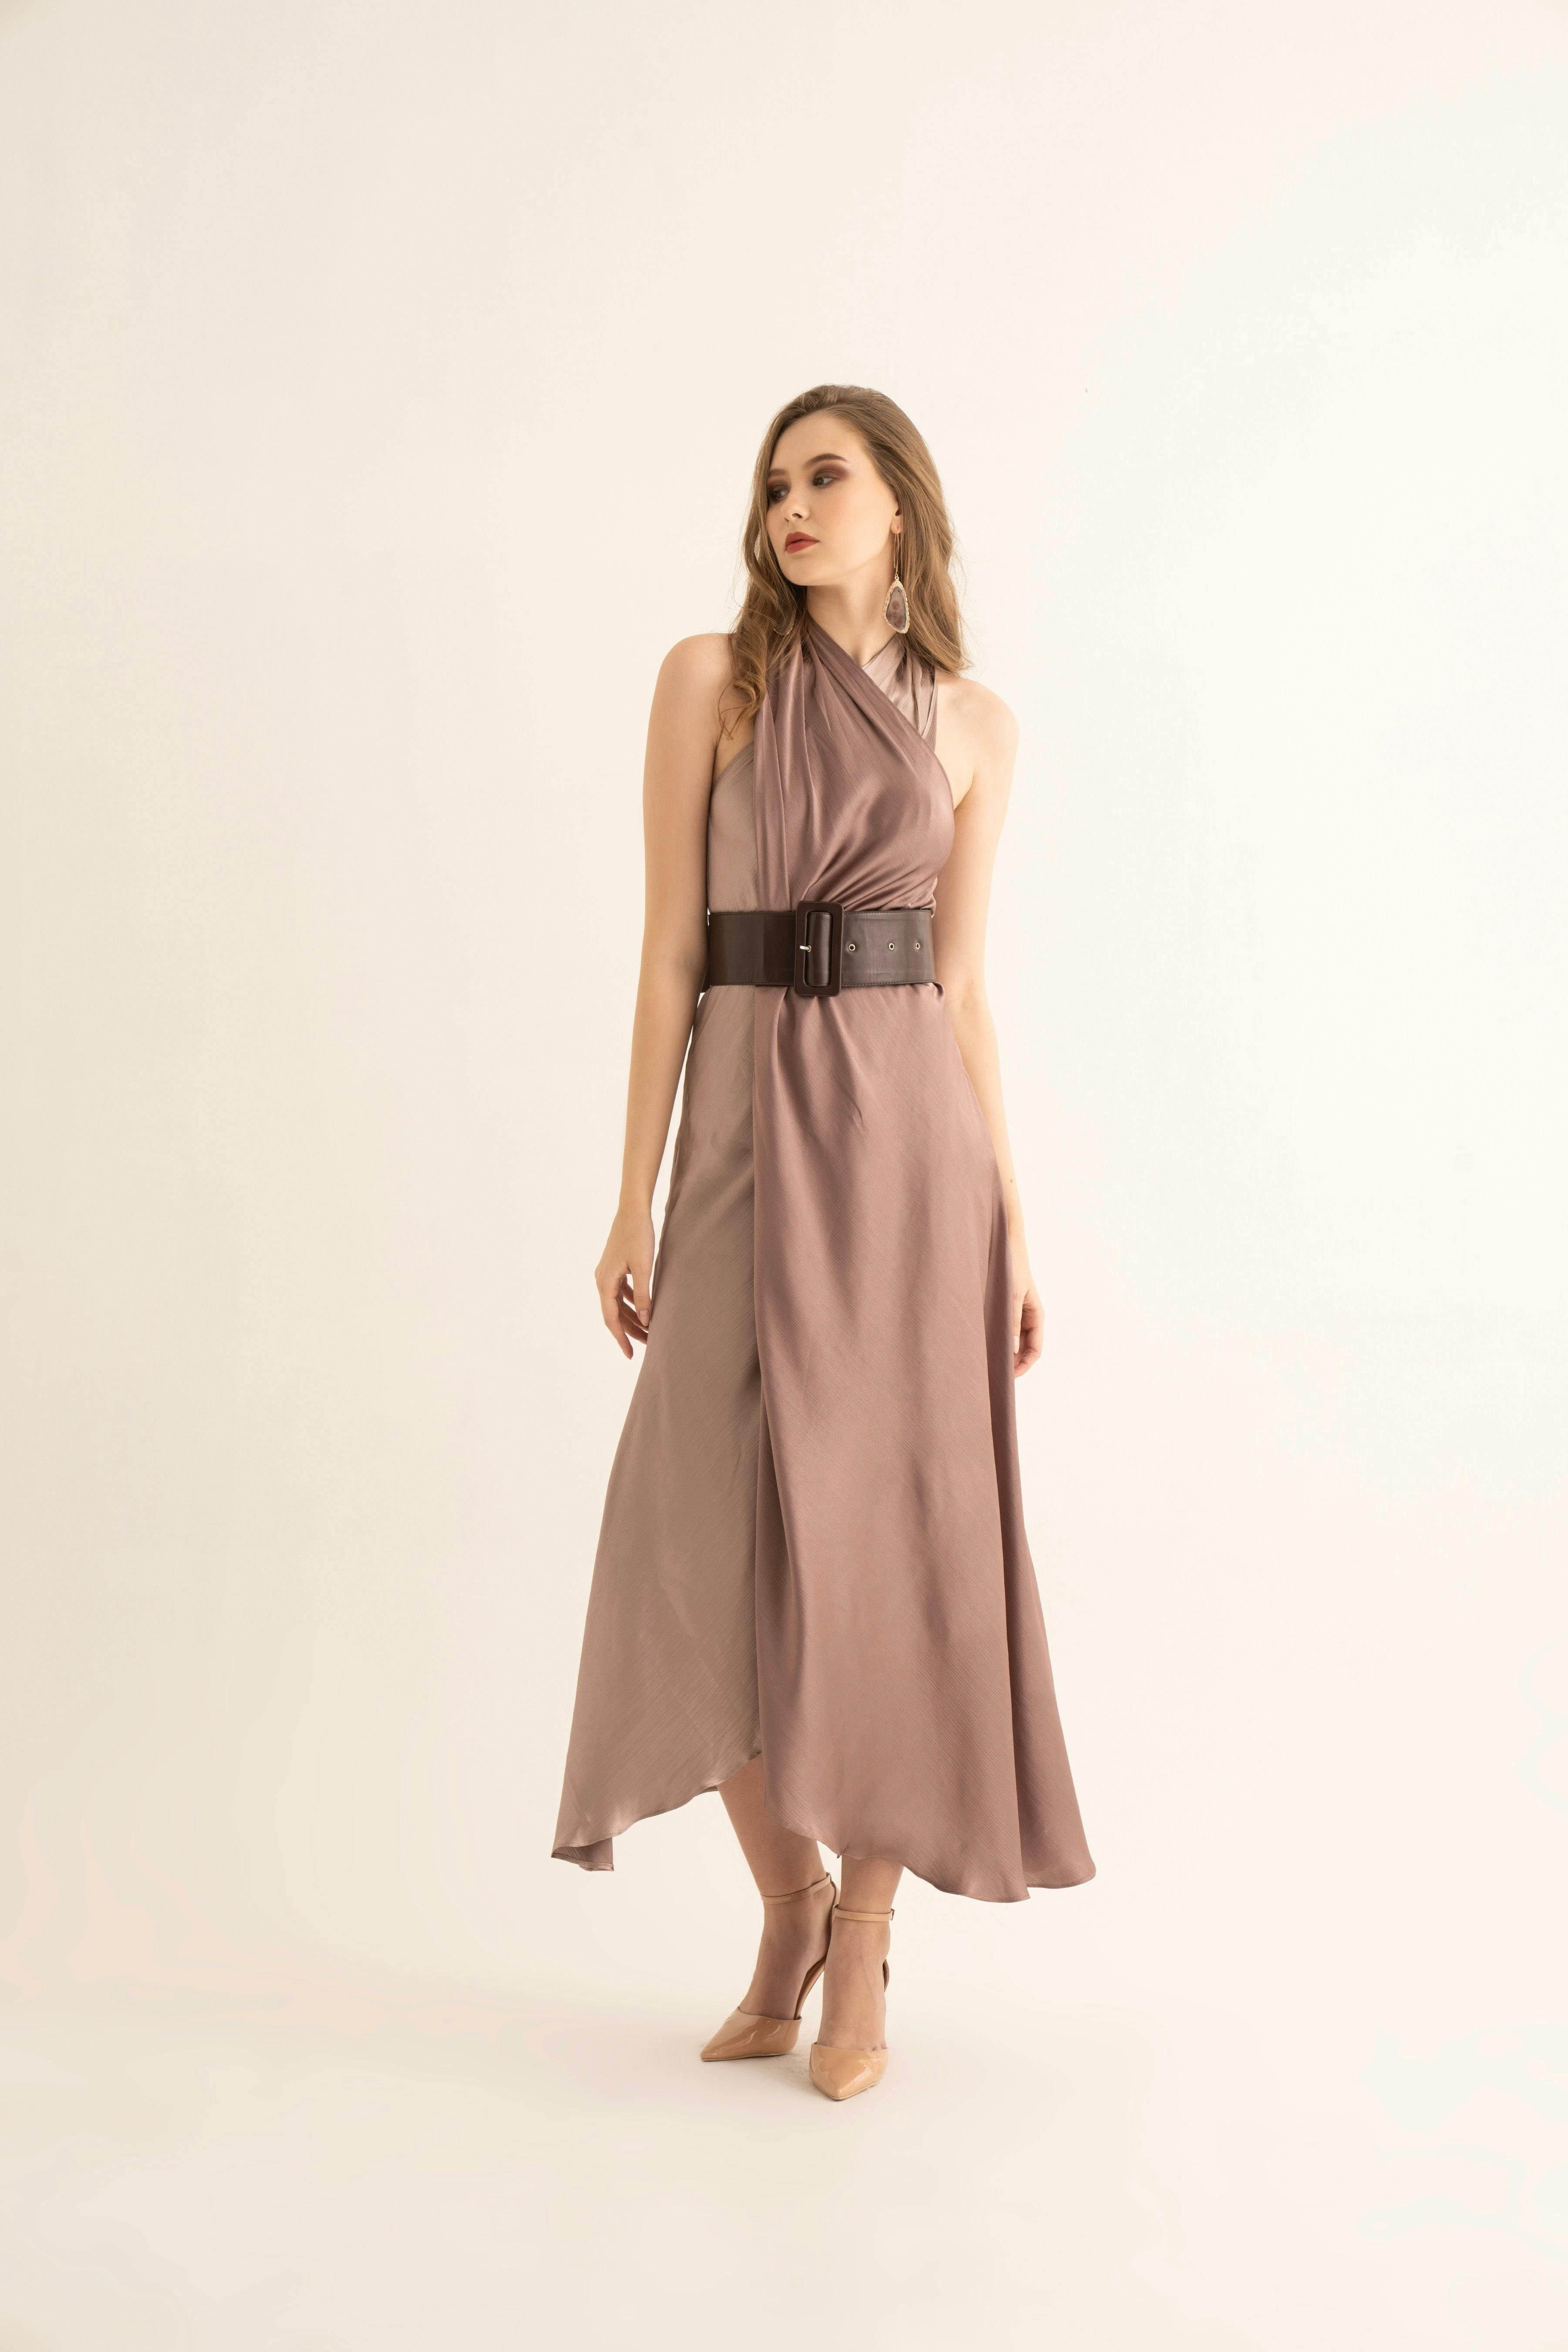 Colour Block Crossover Maxi Dress, a product by Torqadorn